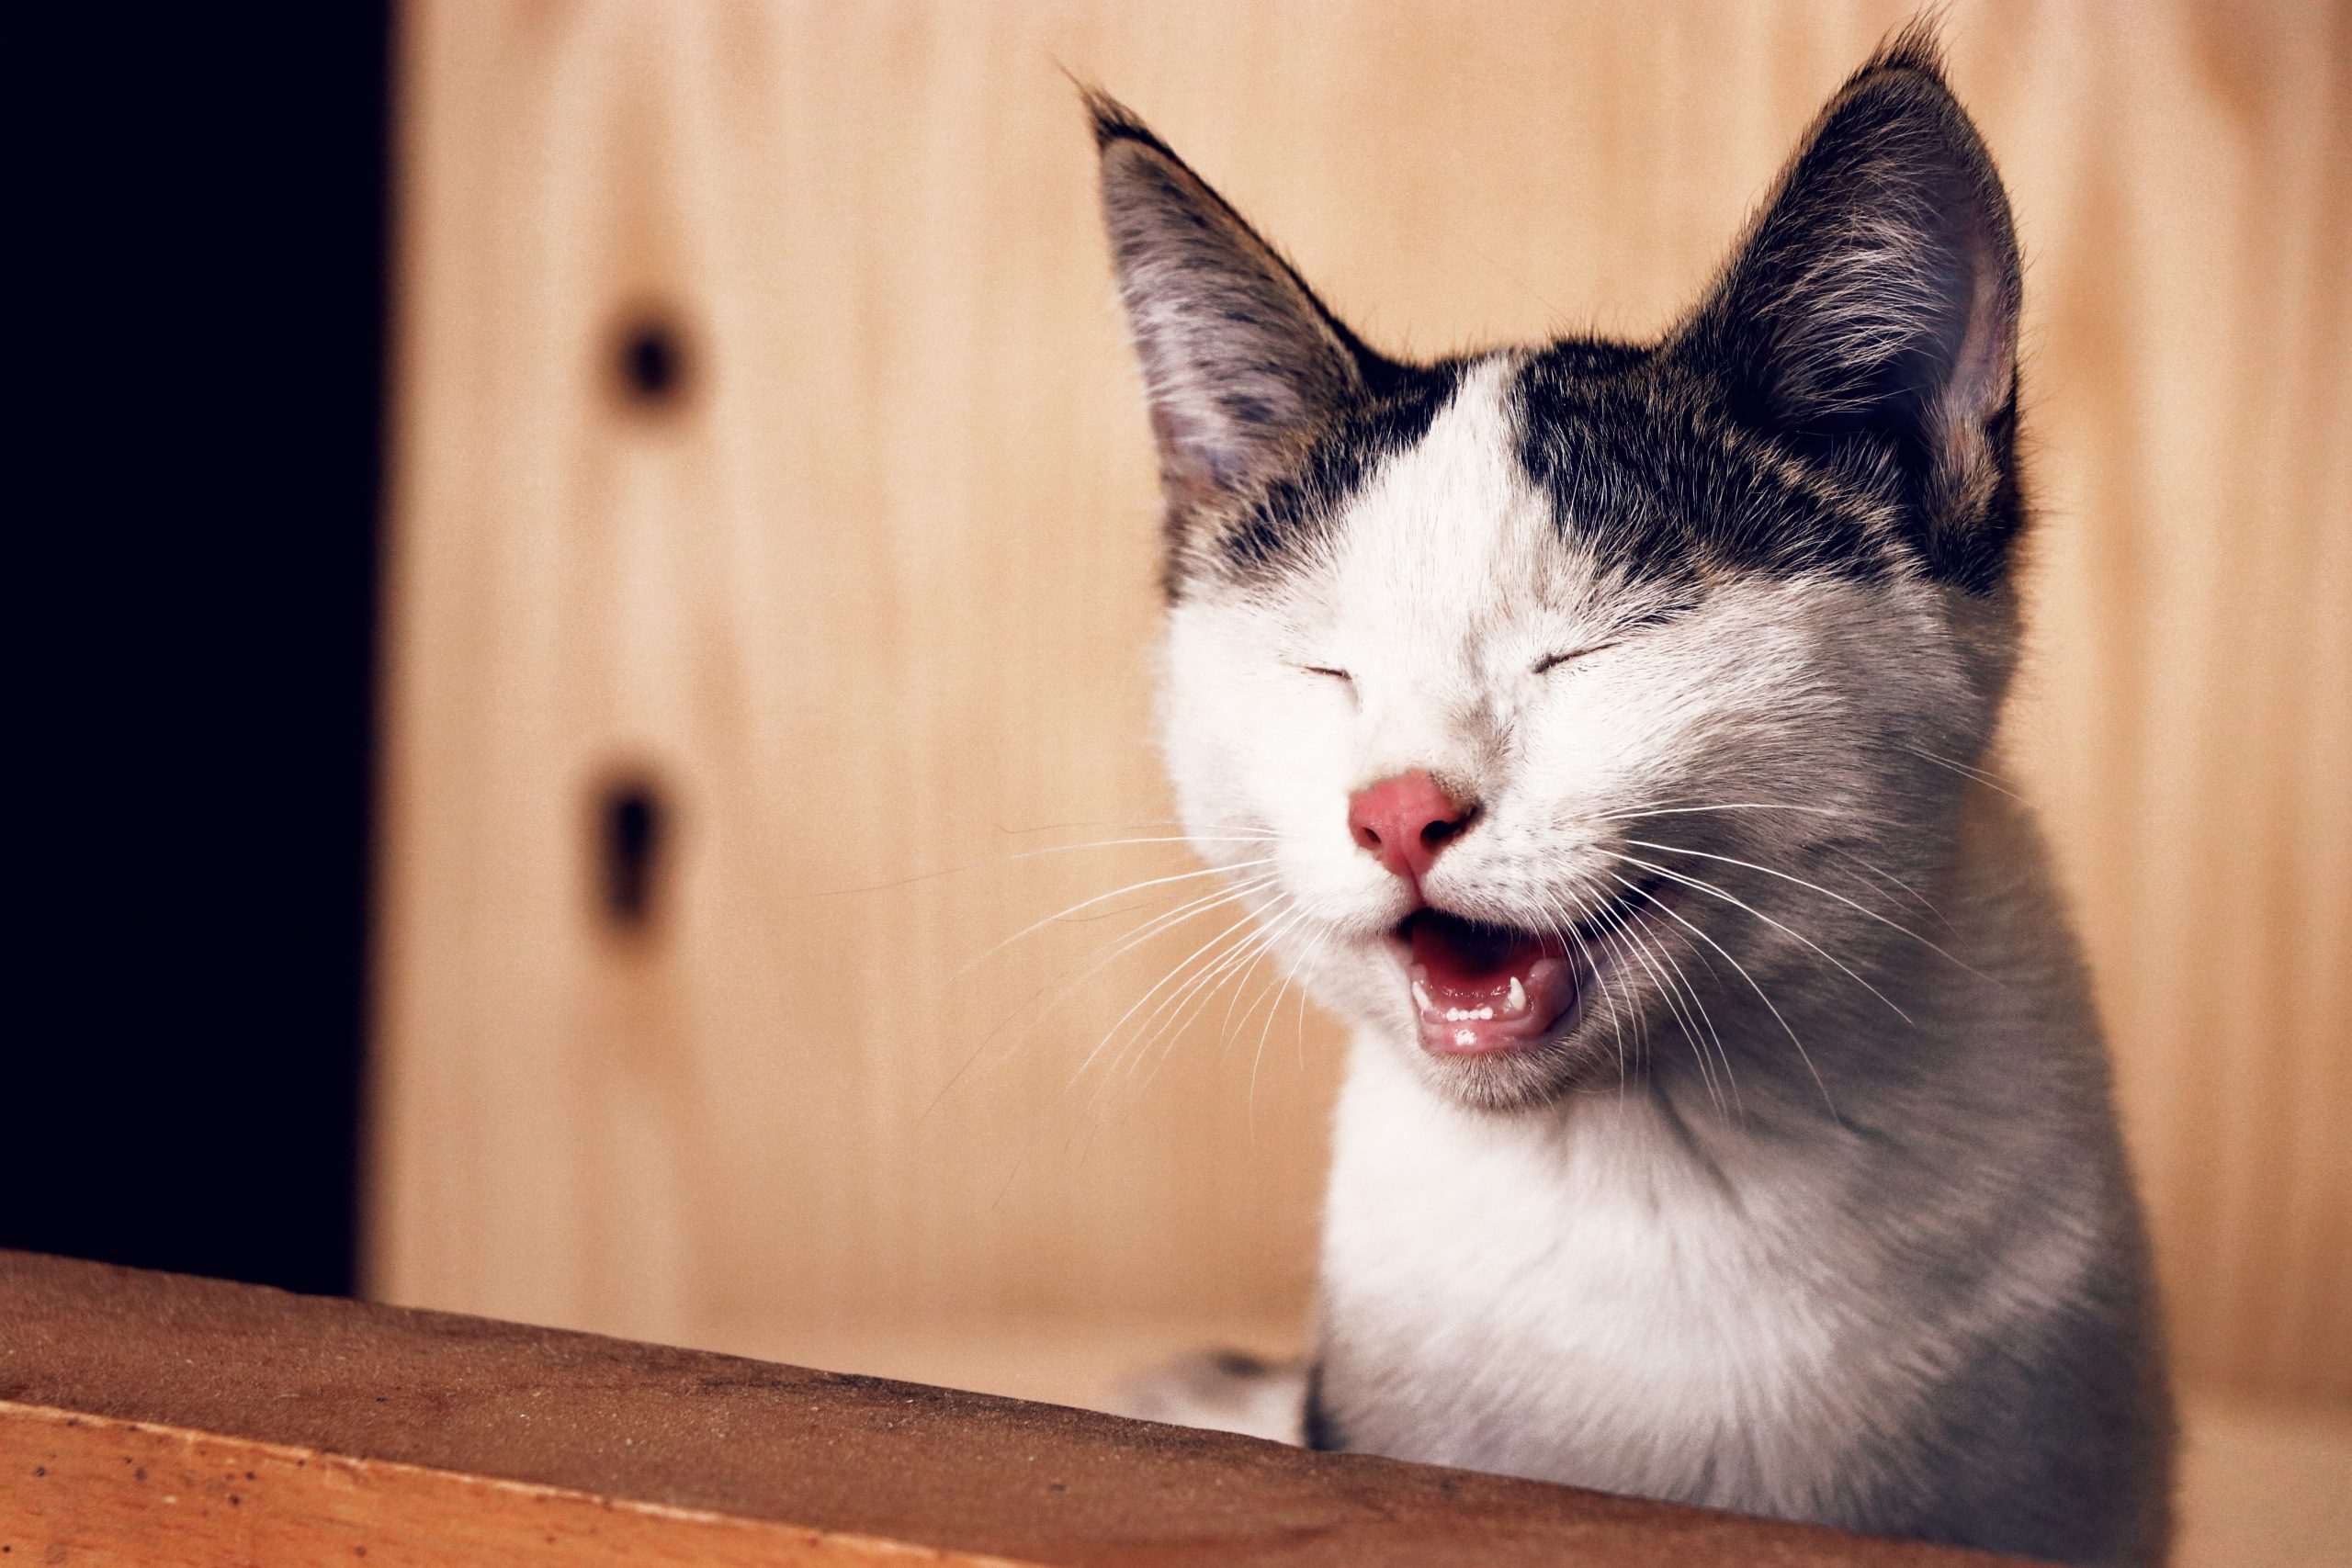 10 things that scare cats (curious as they may seem)